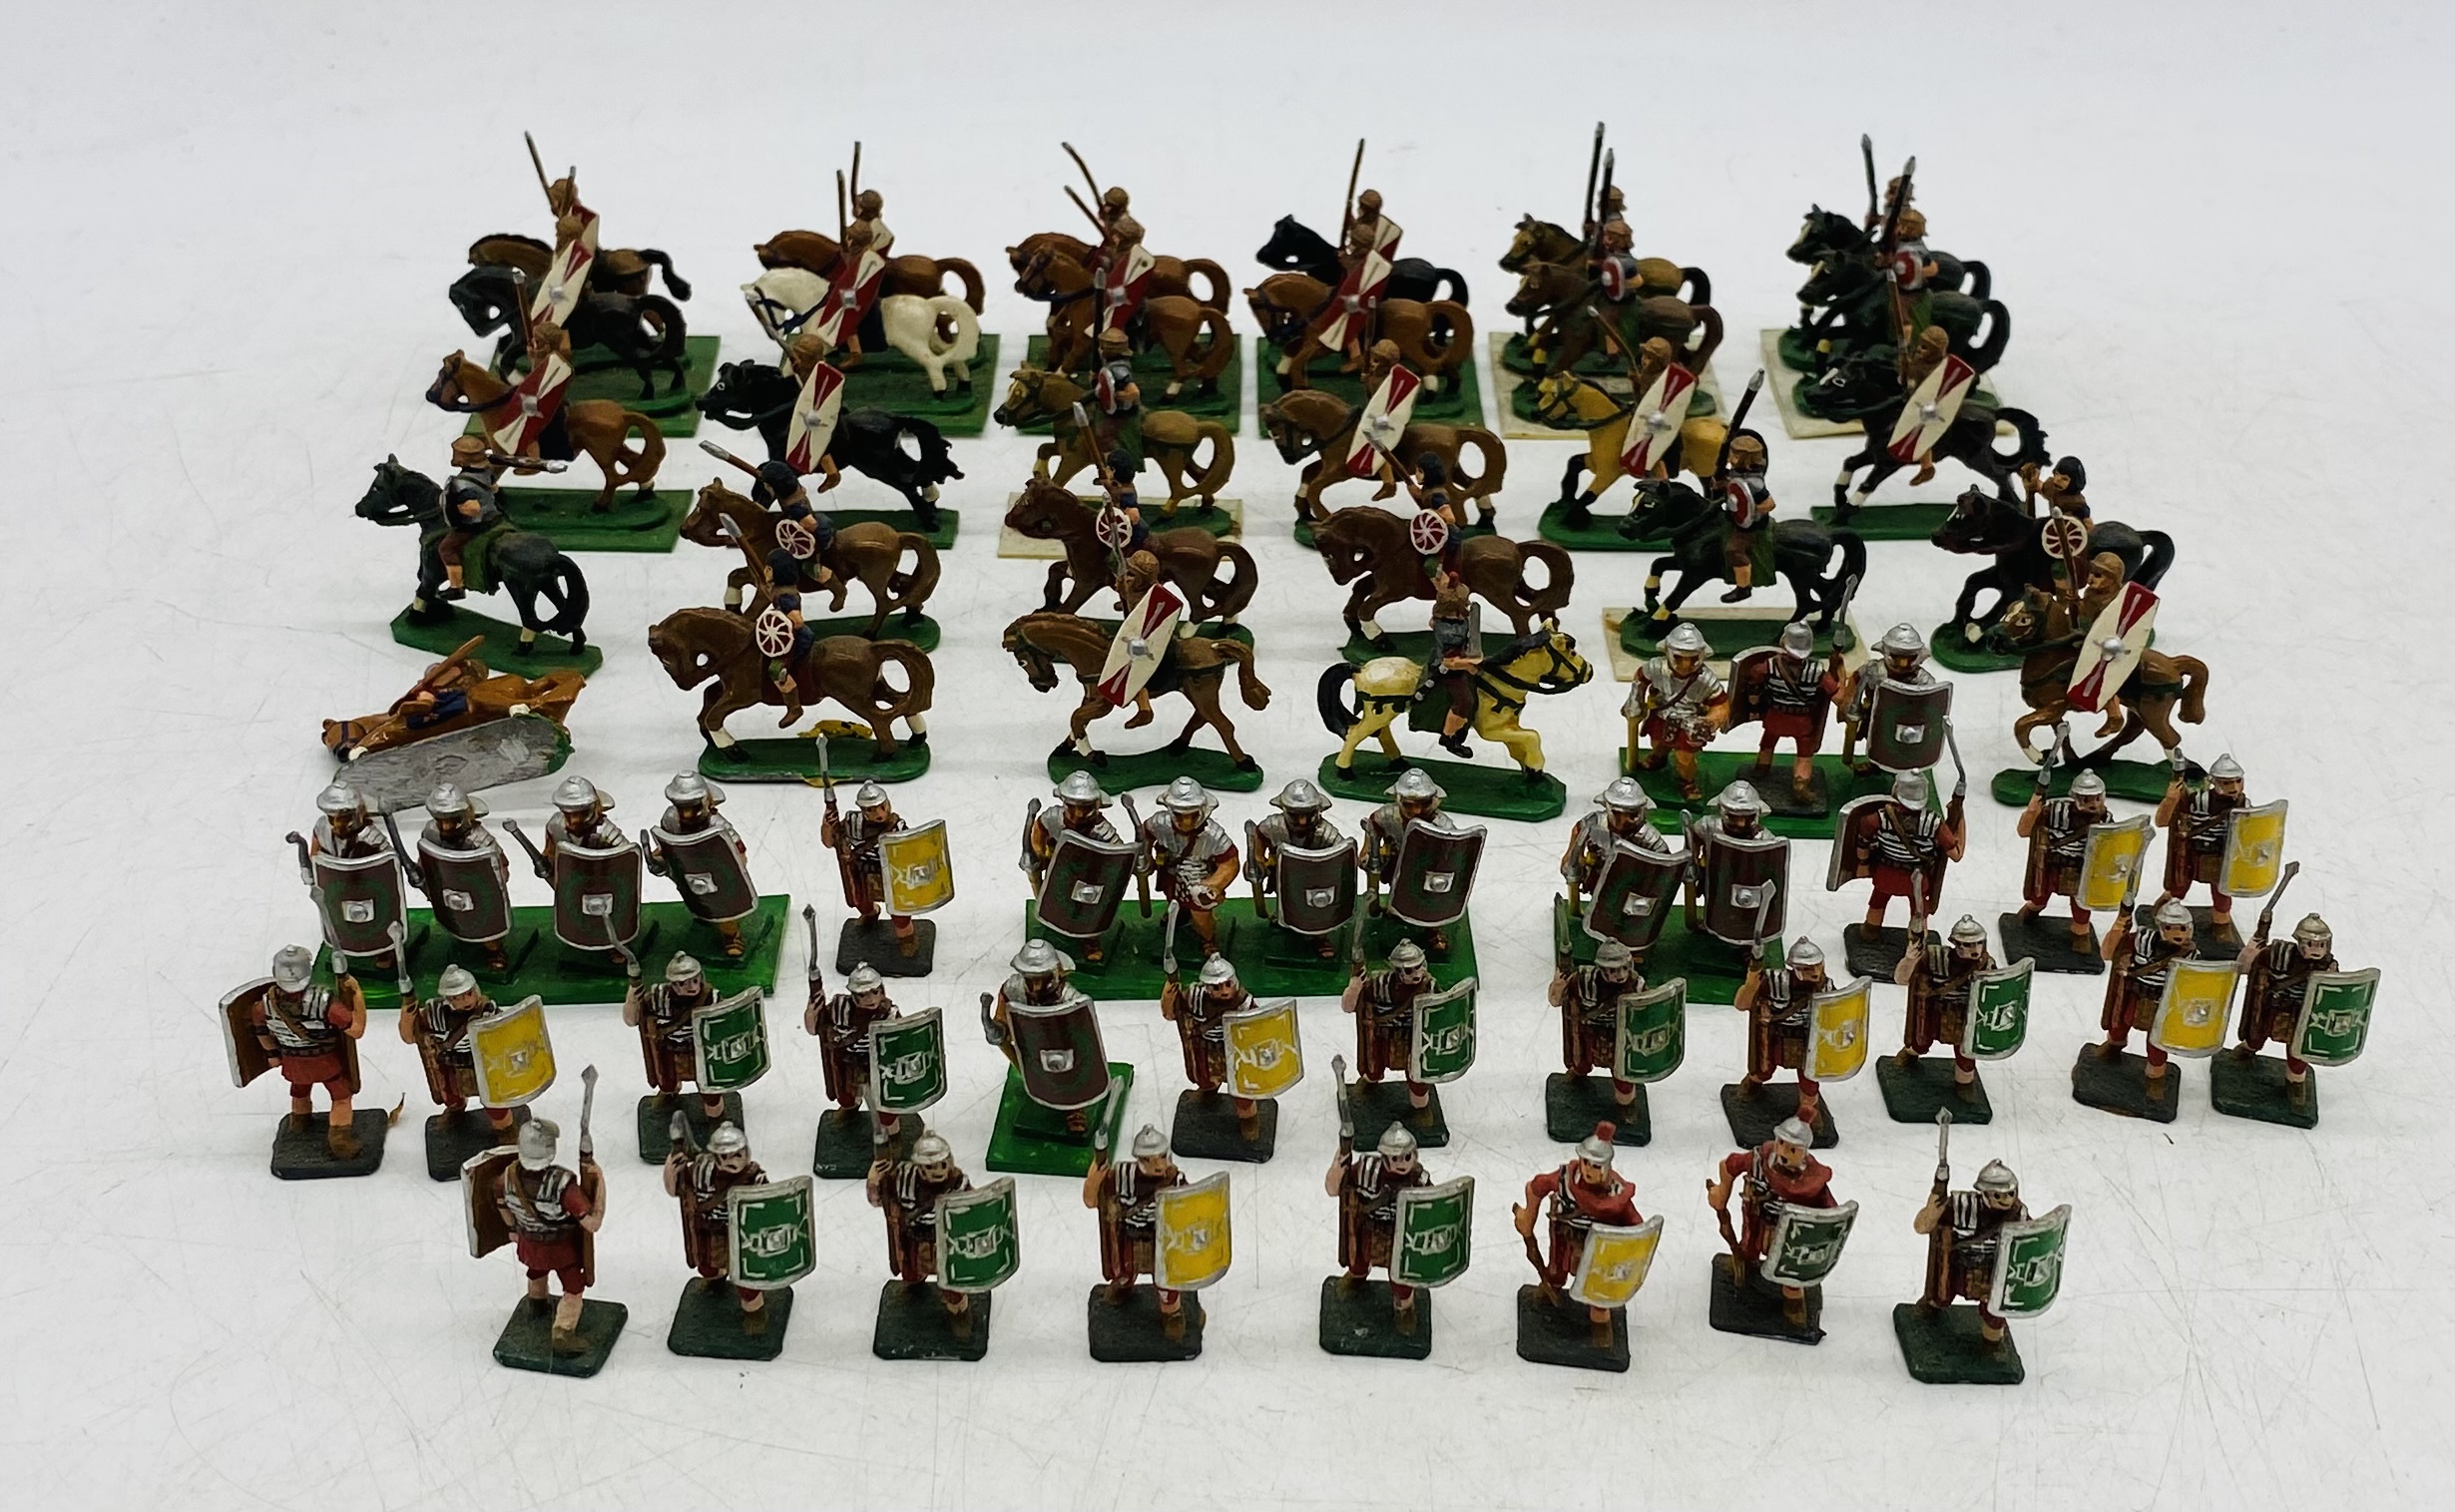 A collection of metal miniature figurines relating to the Roman era including some on horseback